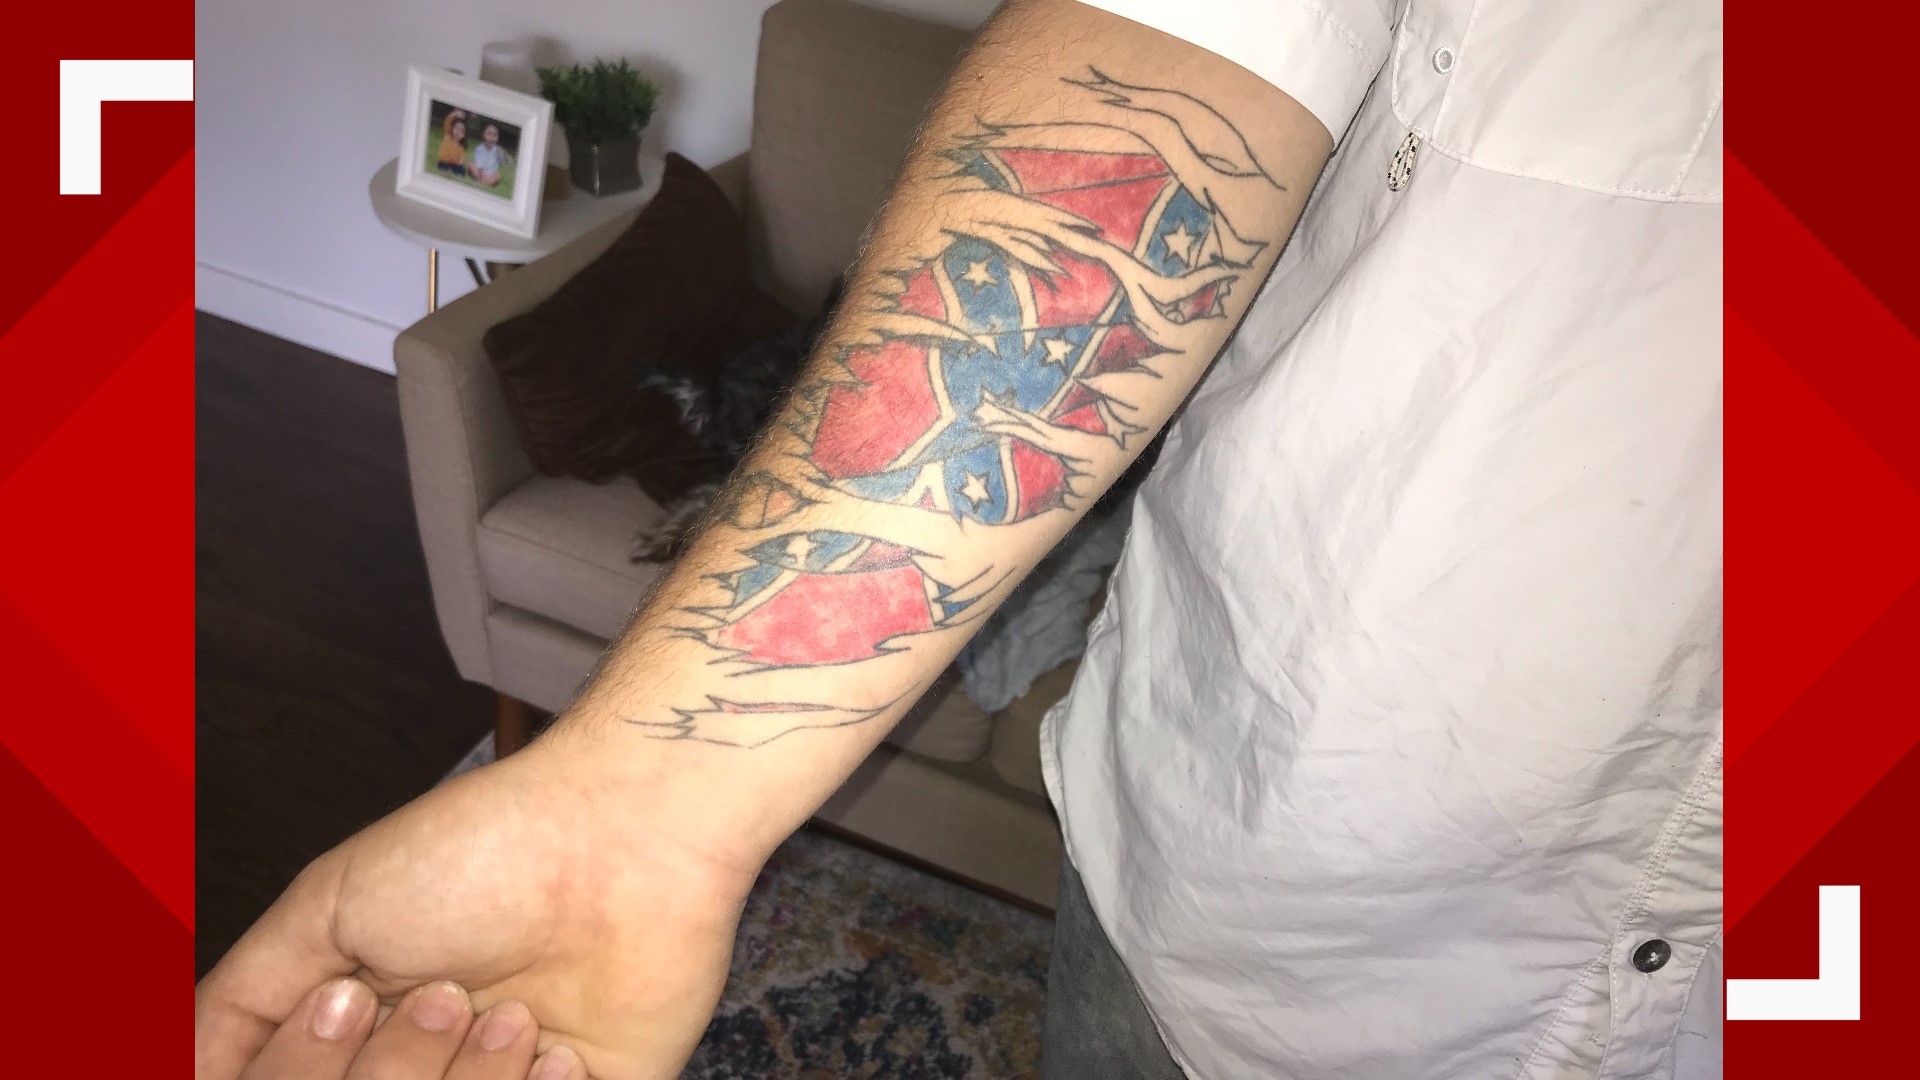 Kole Owens is from Southern Louisiana, and he got a large Confederate flag tattoo on his forearm in 2016. He said he's new to the area and wants a fresh start.